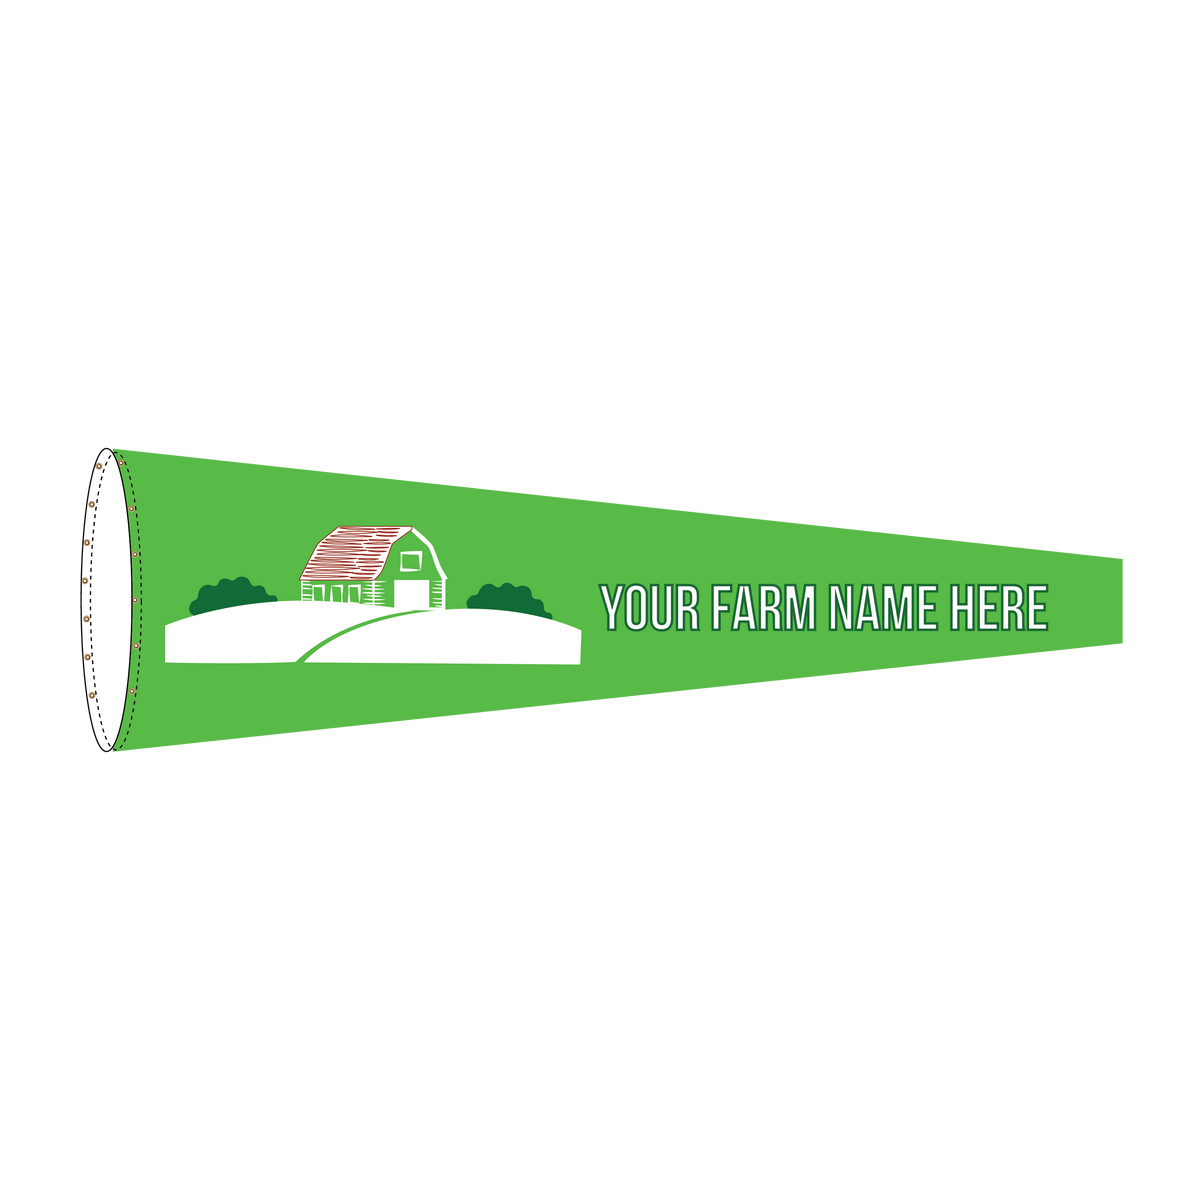 Customize your agricultural windsock with personalized text